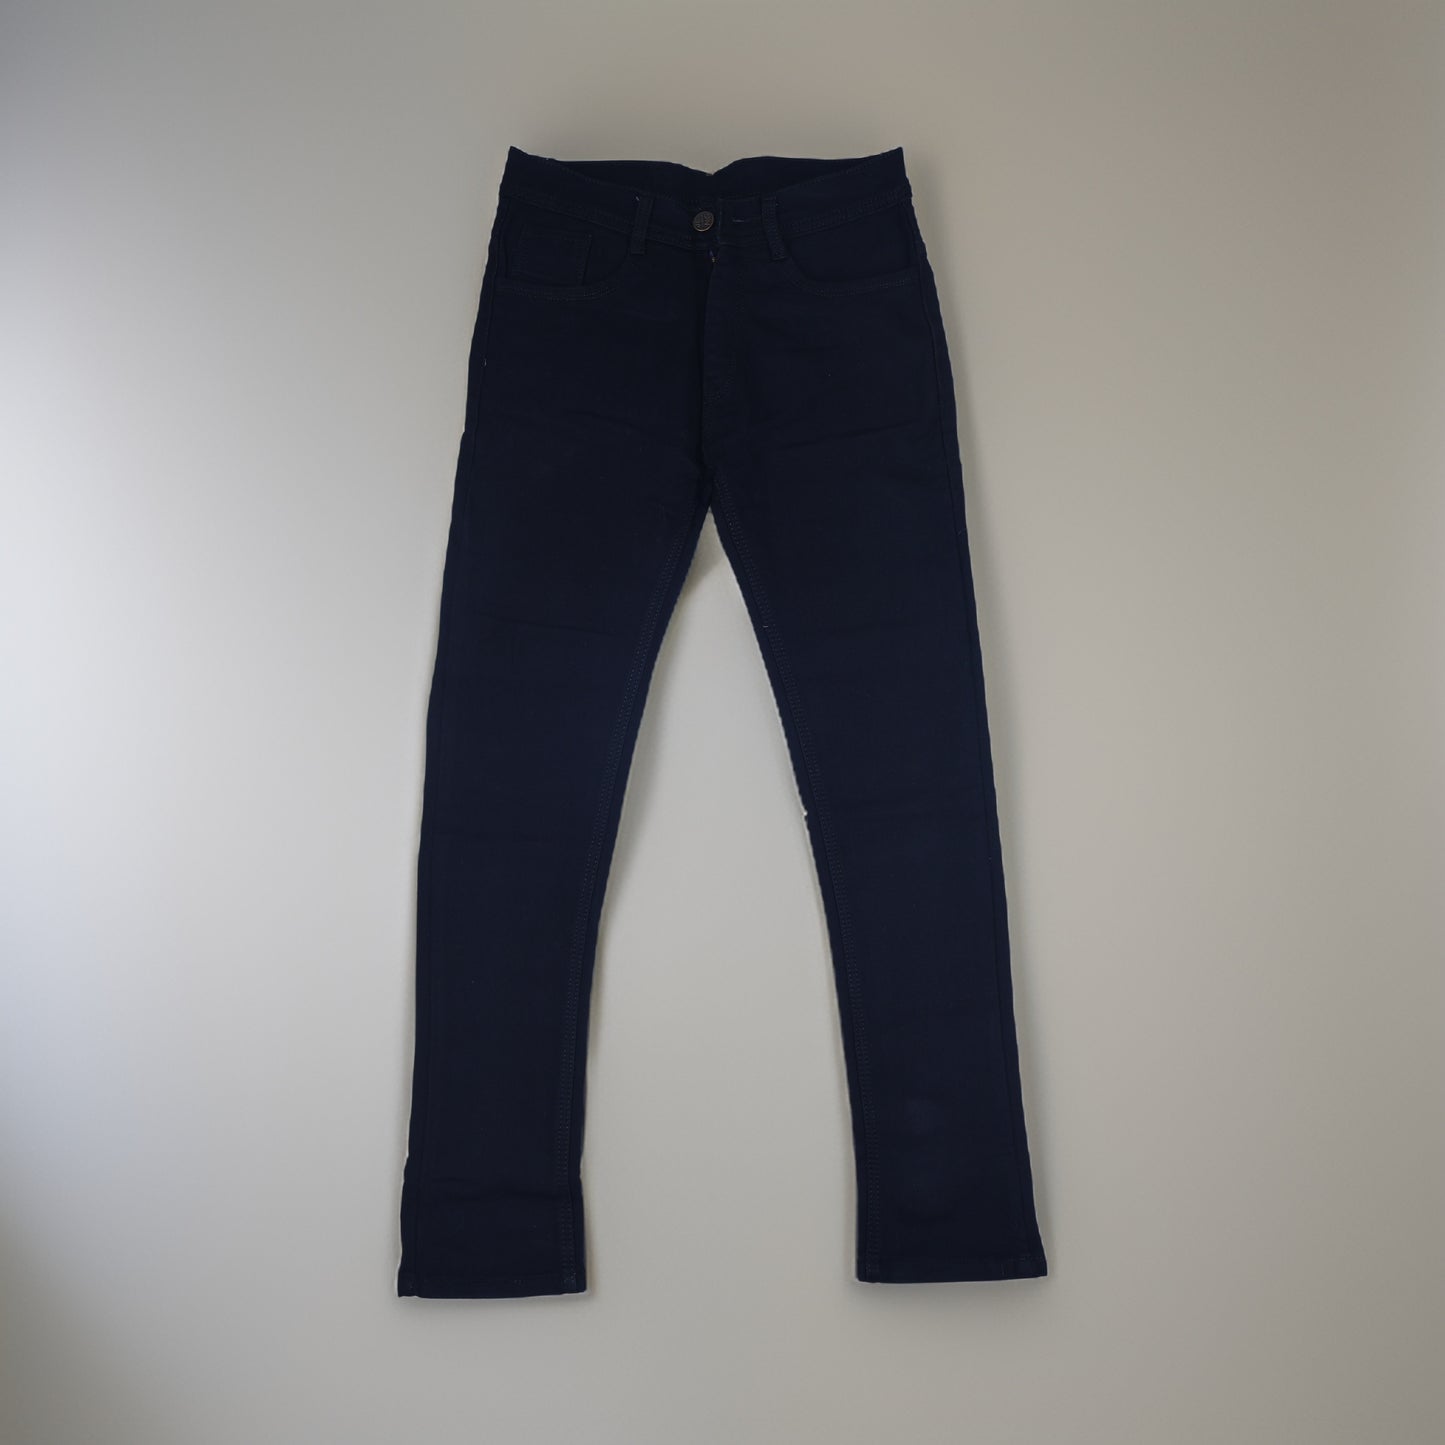 Mud Kniting Men's Jeans